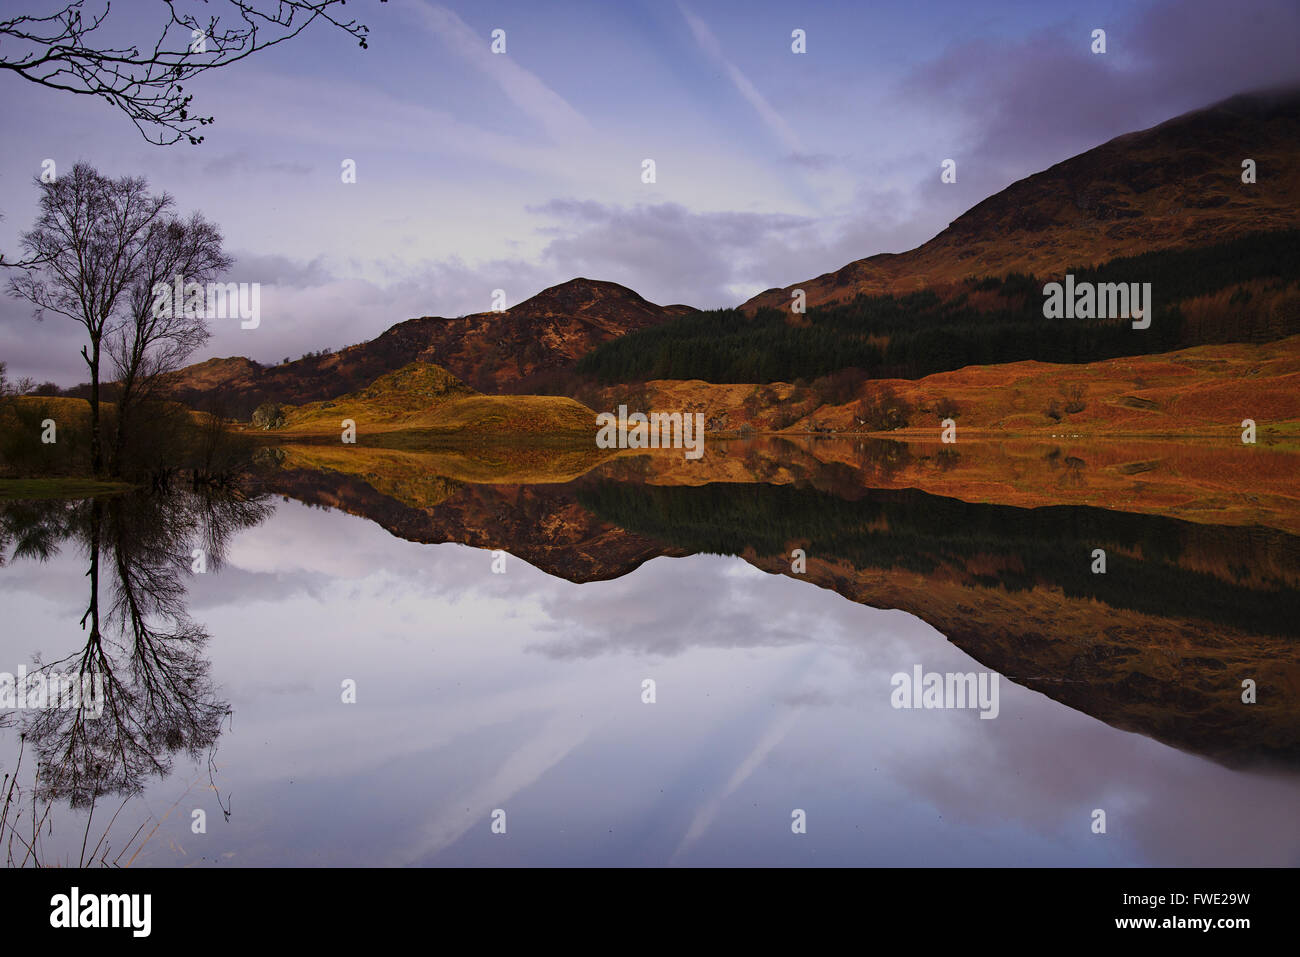 Reflections on Loch Lubhair, Scottish Highlands Stock Photo